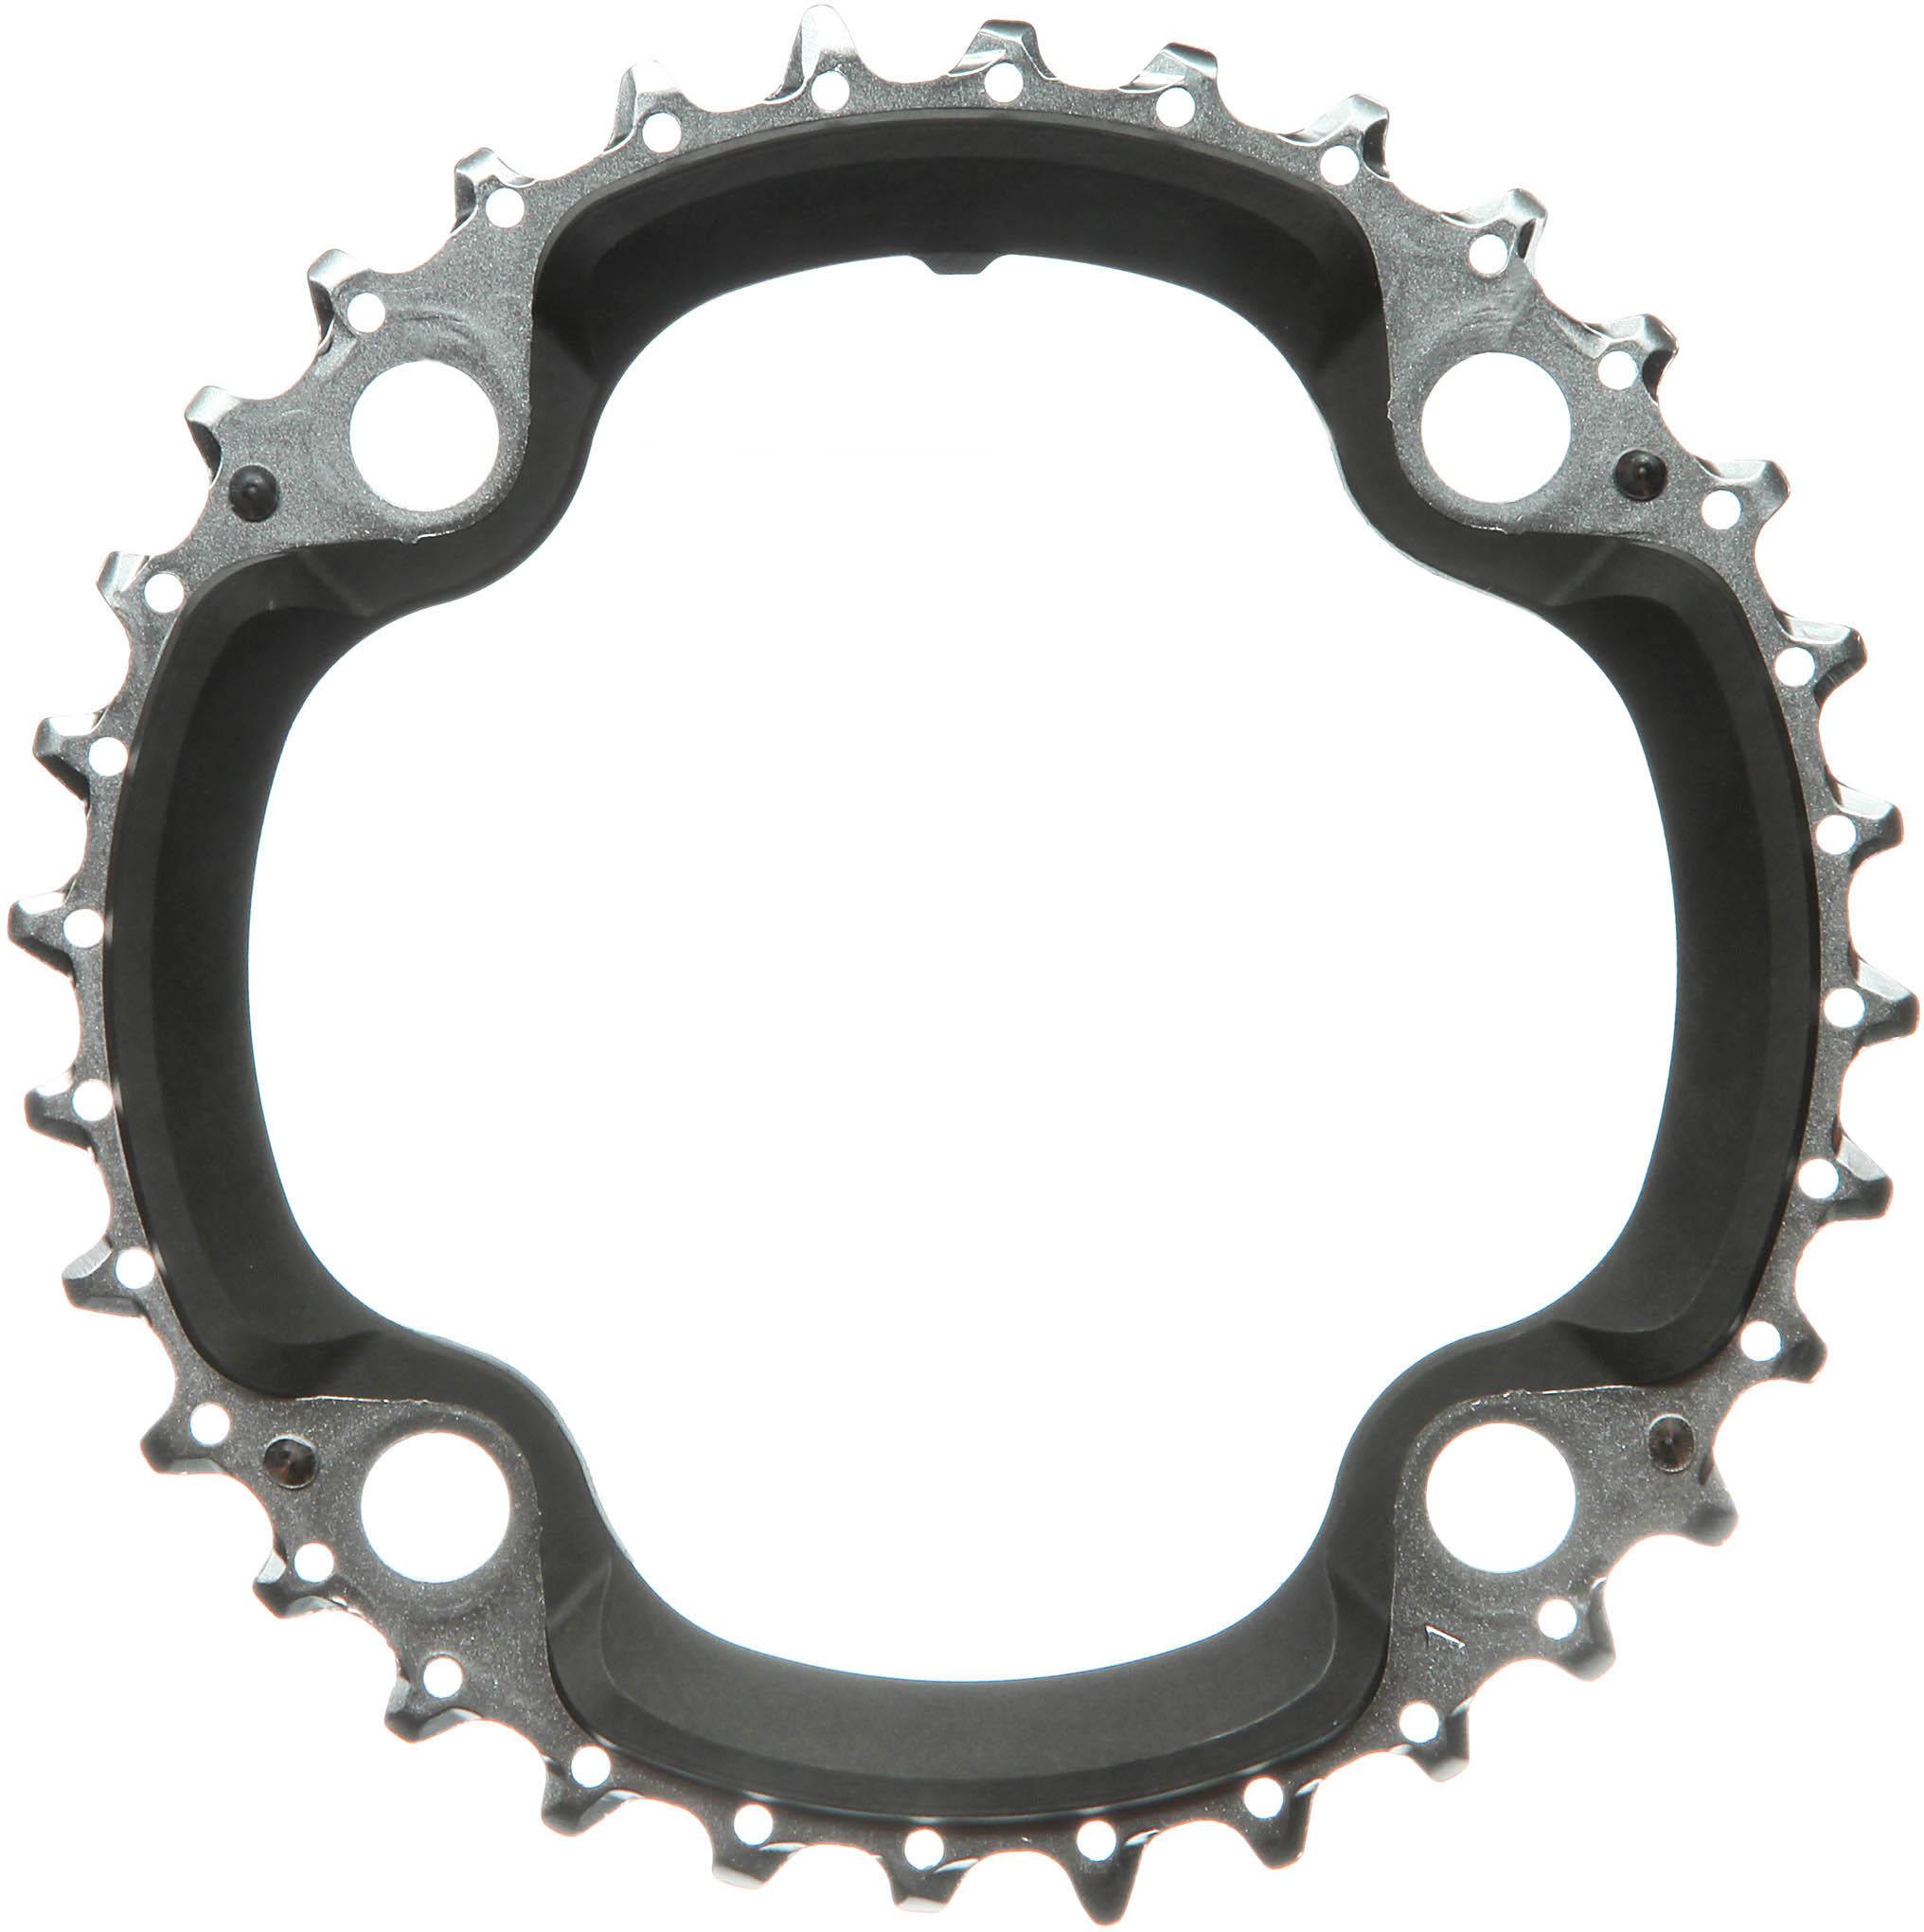 Shimano Xt M770 9 Speed Chainring - Silver